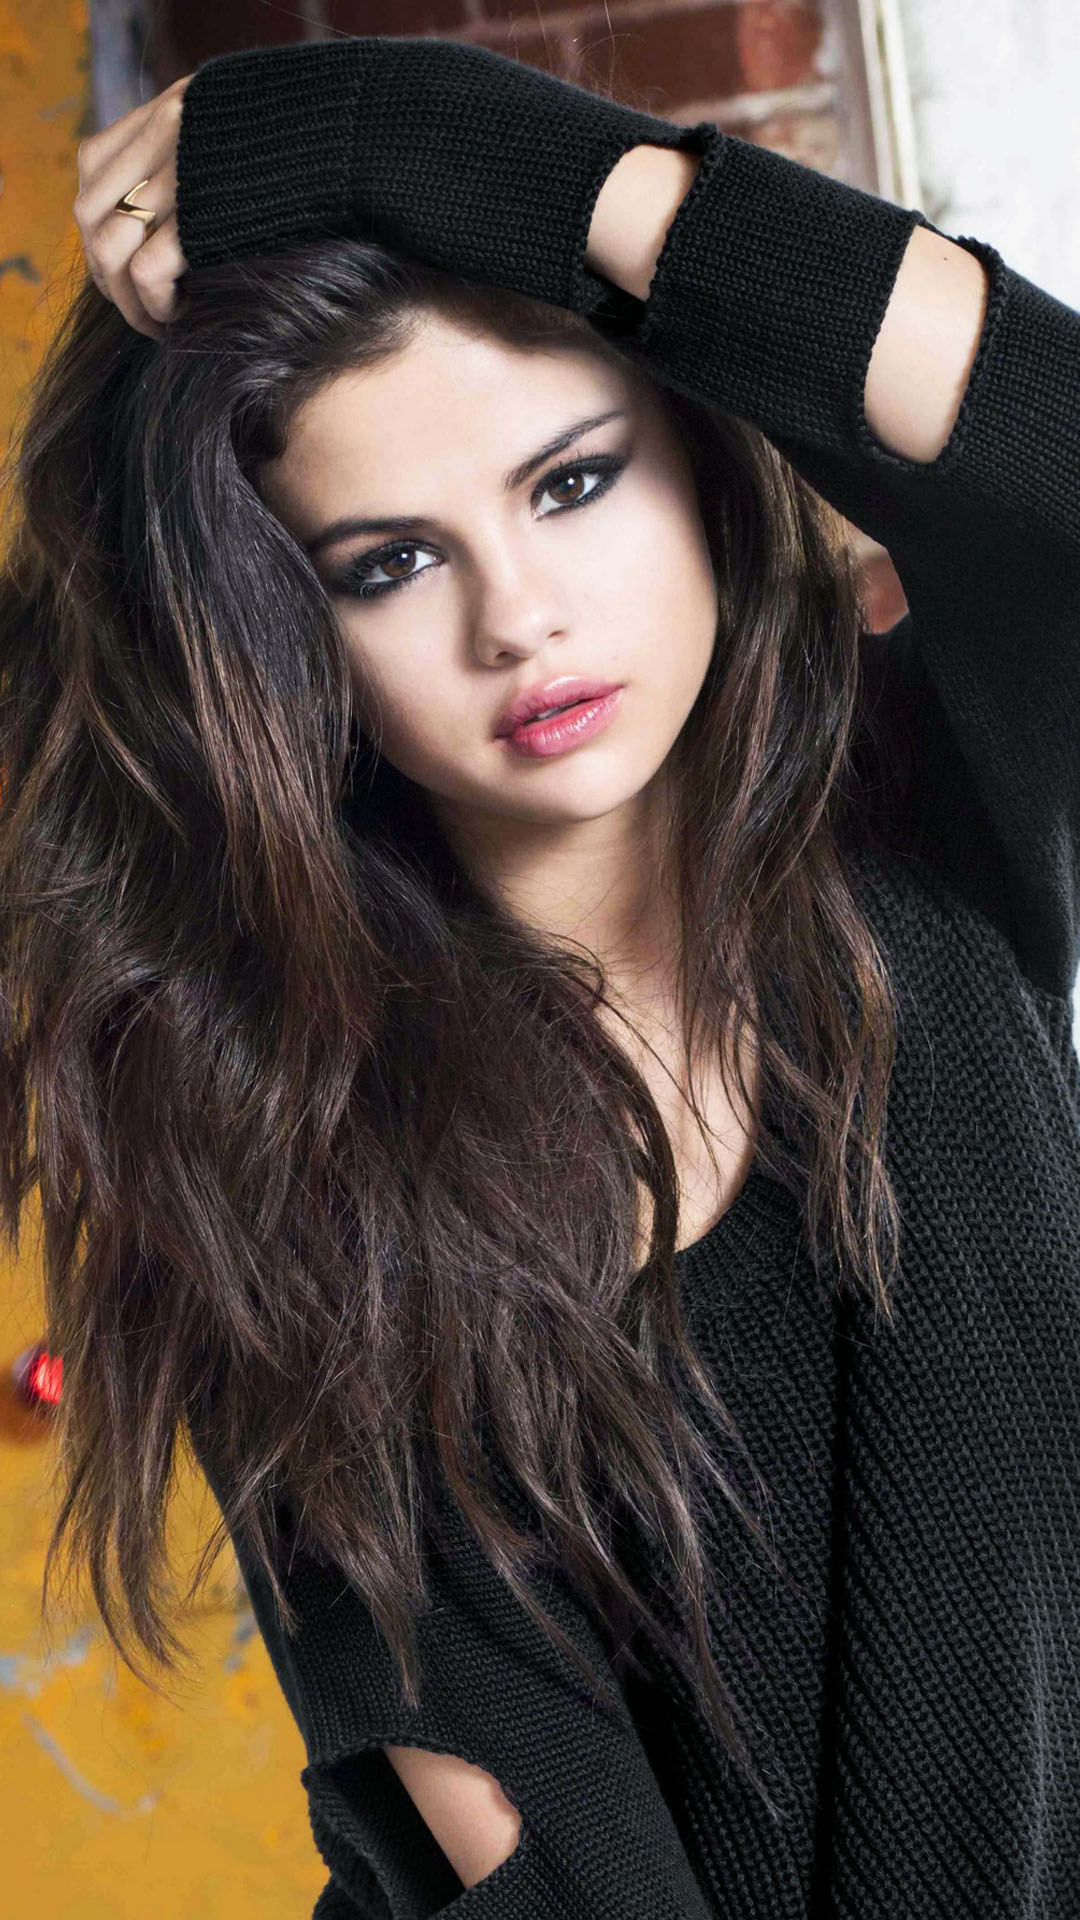 Selena Gomez In Black iPhone 6 6 Plus and iPhone 54 Wallpapers